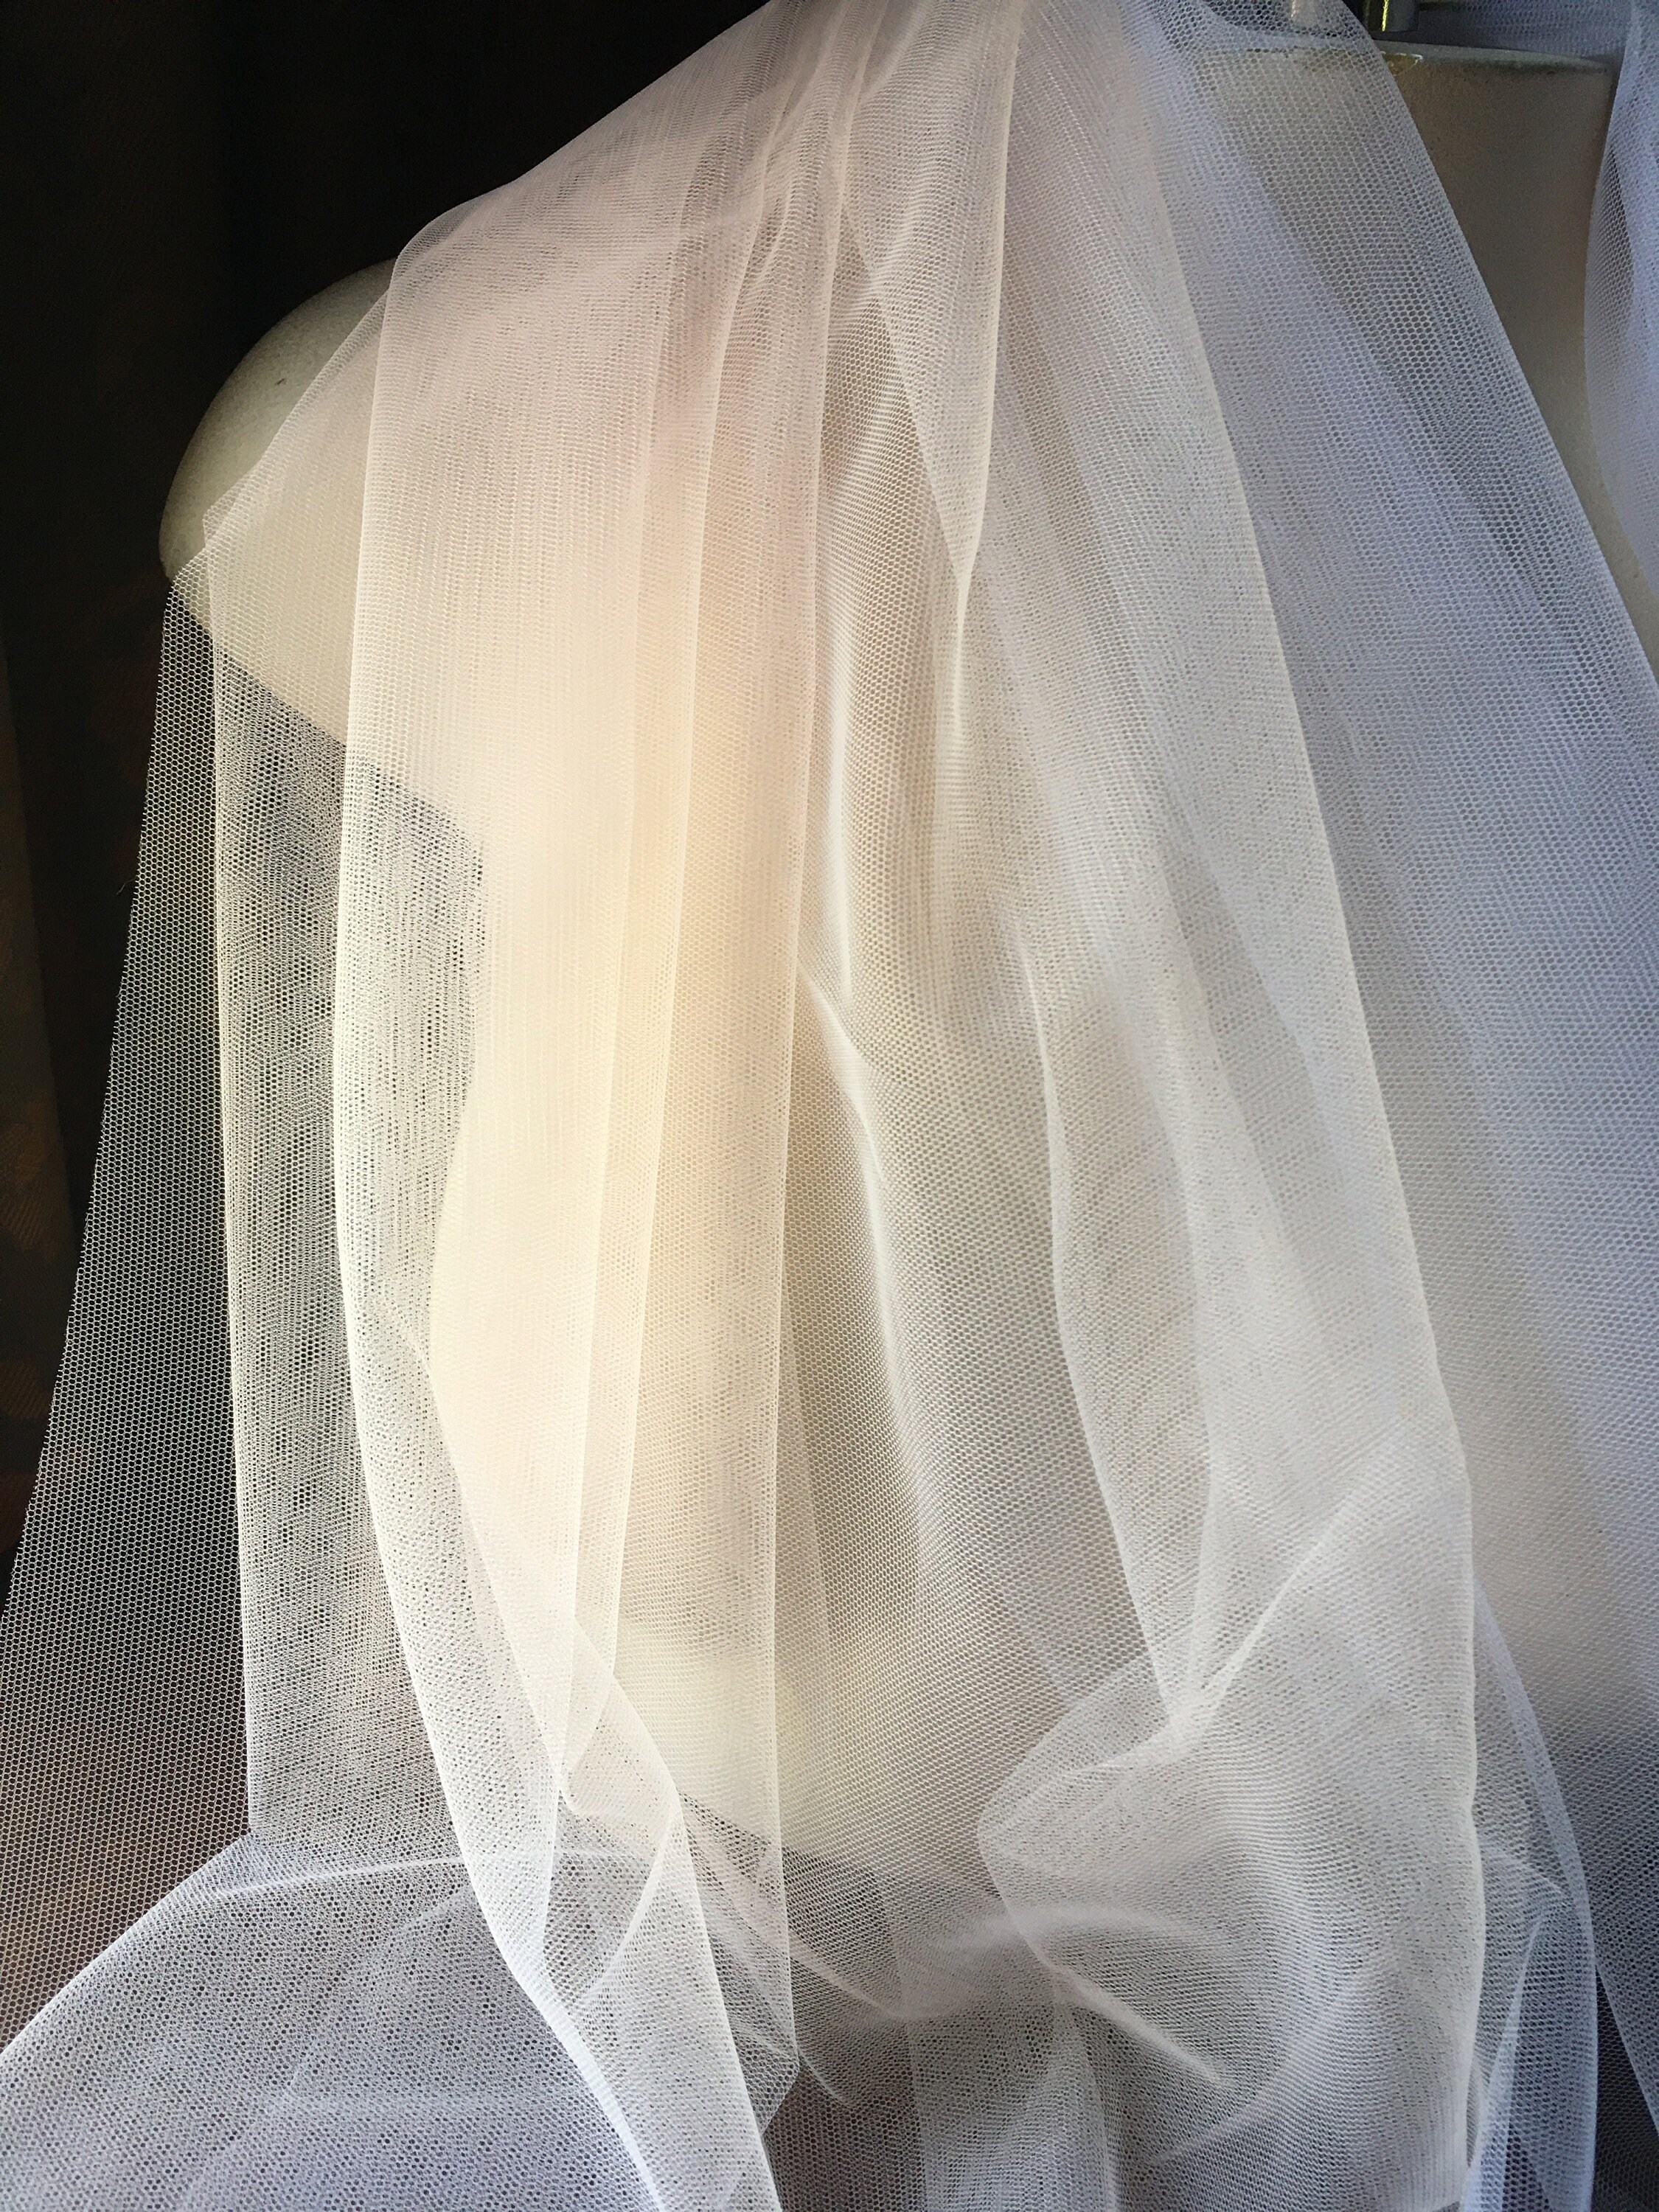 Super Fine Luxury White Tulle Veiling Fabric 150cm Wide Very